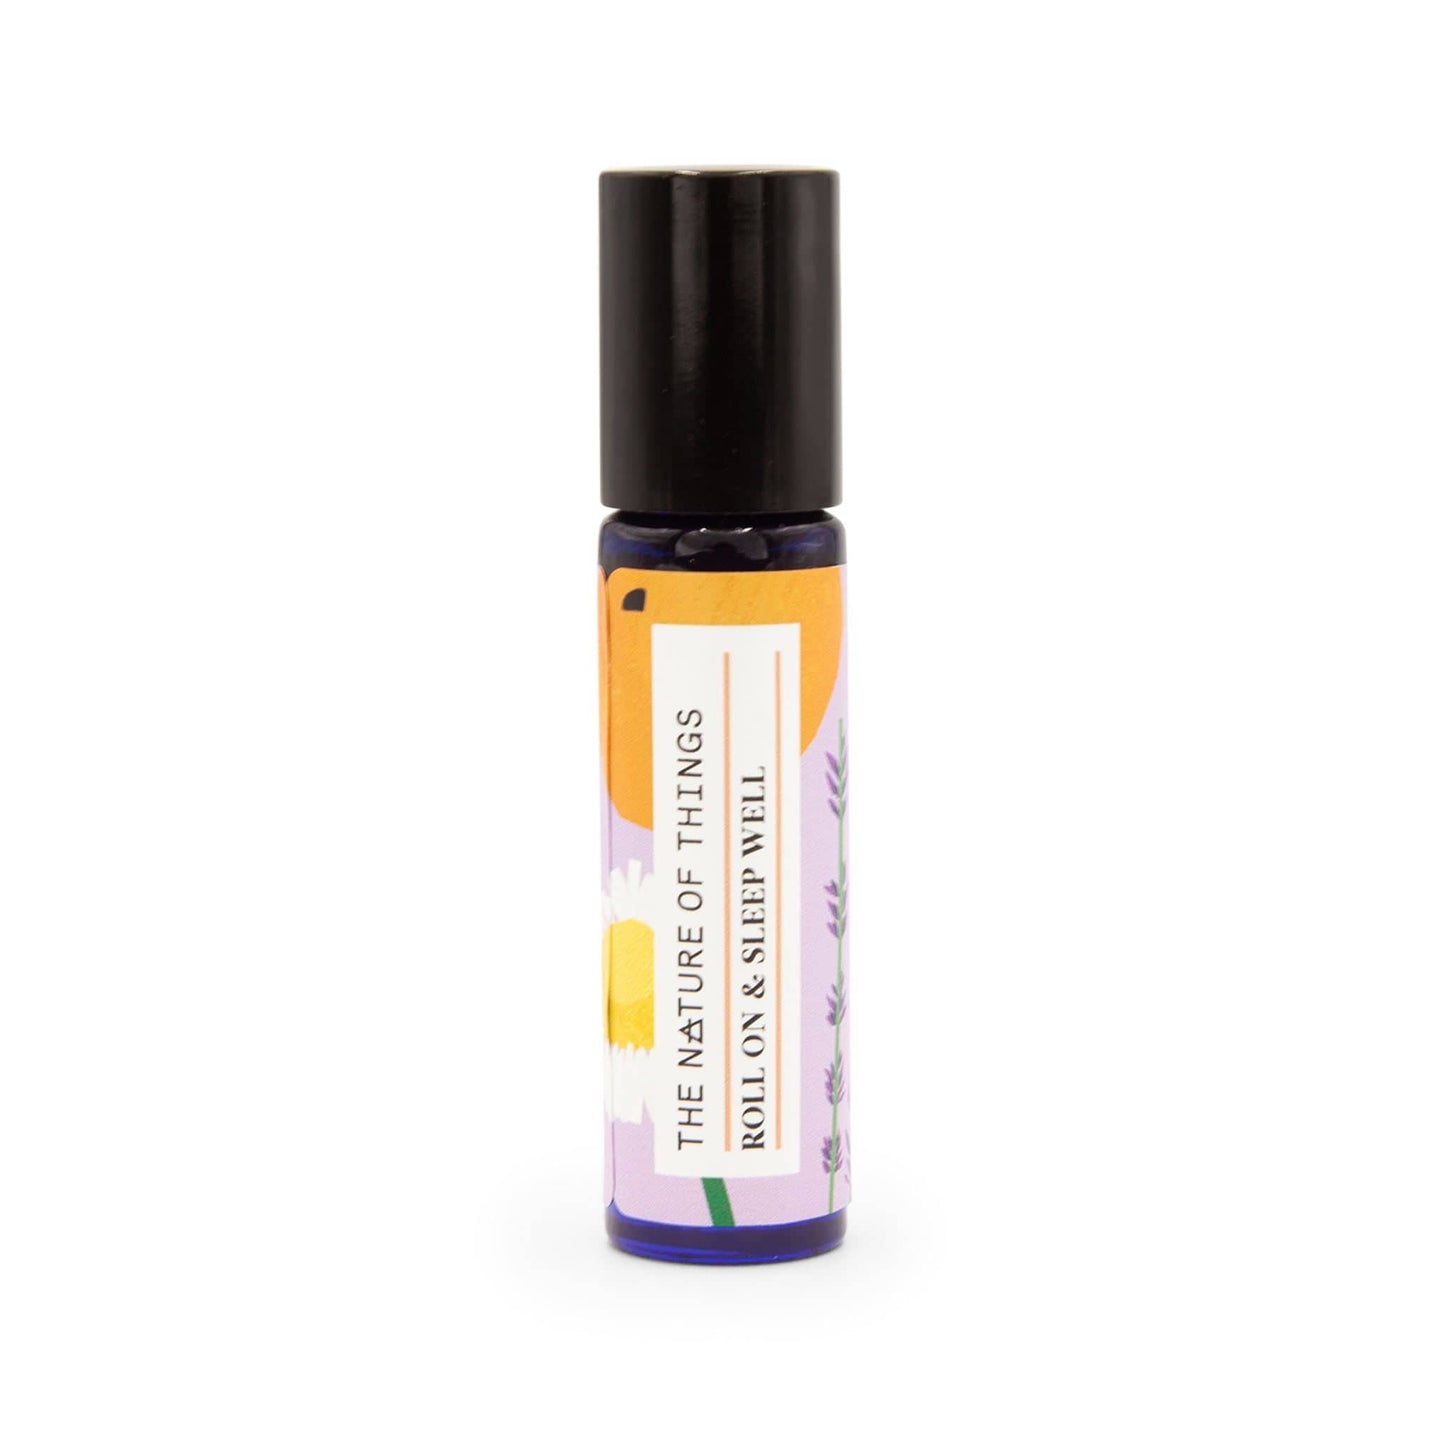 The Nature of Things Essential Oil Sleep Well Aromatherapy Roll On 10ml - The Nature of Things